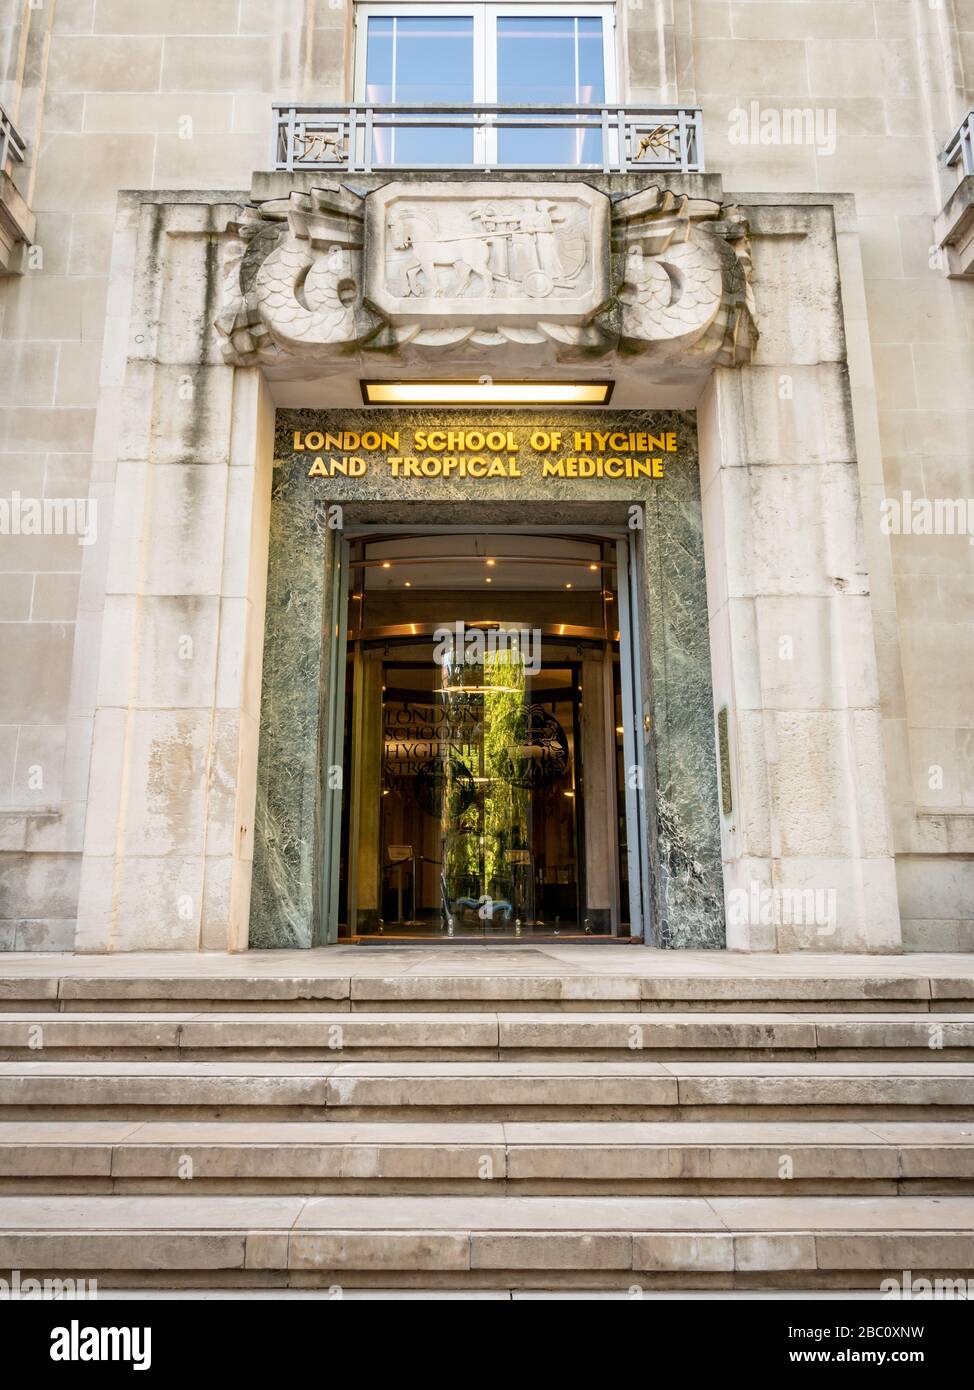 The London School of Hygiene and Tropical Medicine, Bloomsbury. Art Deco entrance to the LSHTM, a constituent college of the University of London. Stock Photo